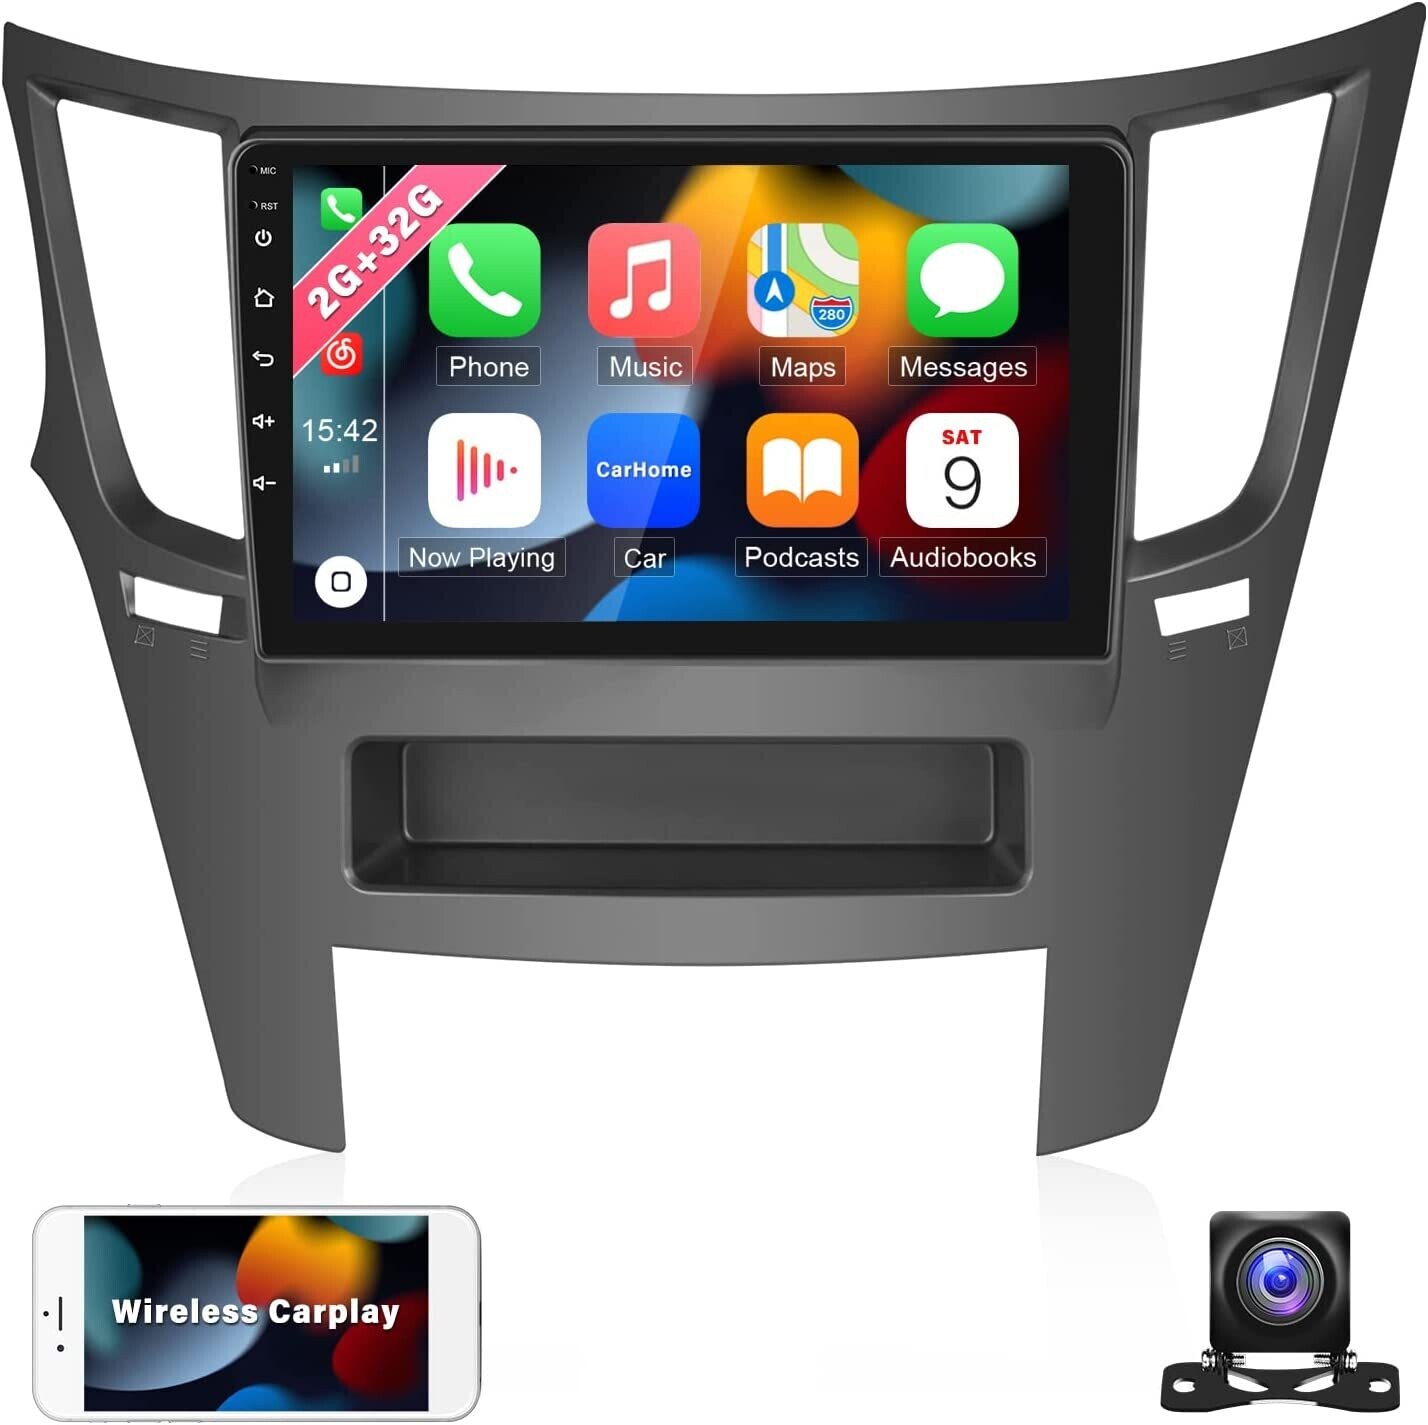 Subaru Legacy/Outback Android touch screen smart custom car stereo radio 9 inch, with bluetooth, GPS, Android auto and Apple Carplay 2gb 32gb. 2010, 2011, 2012, 2013, 2014